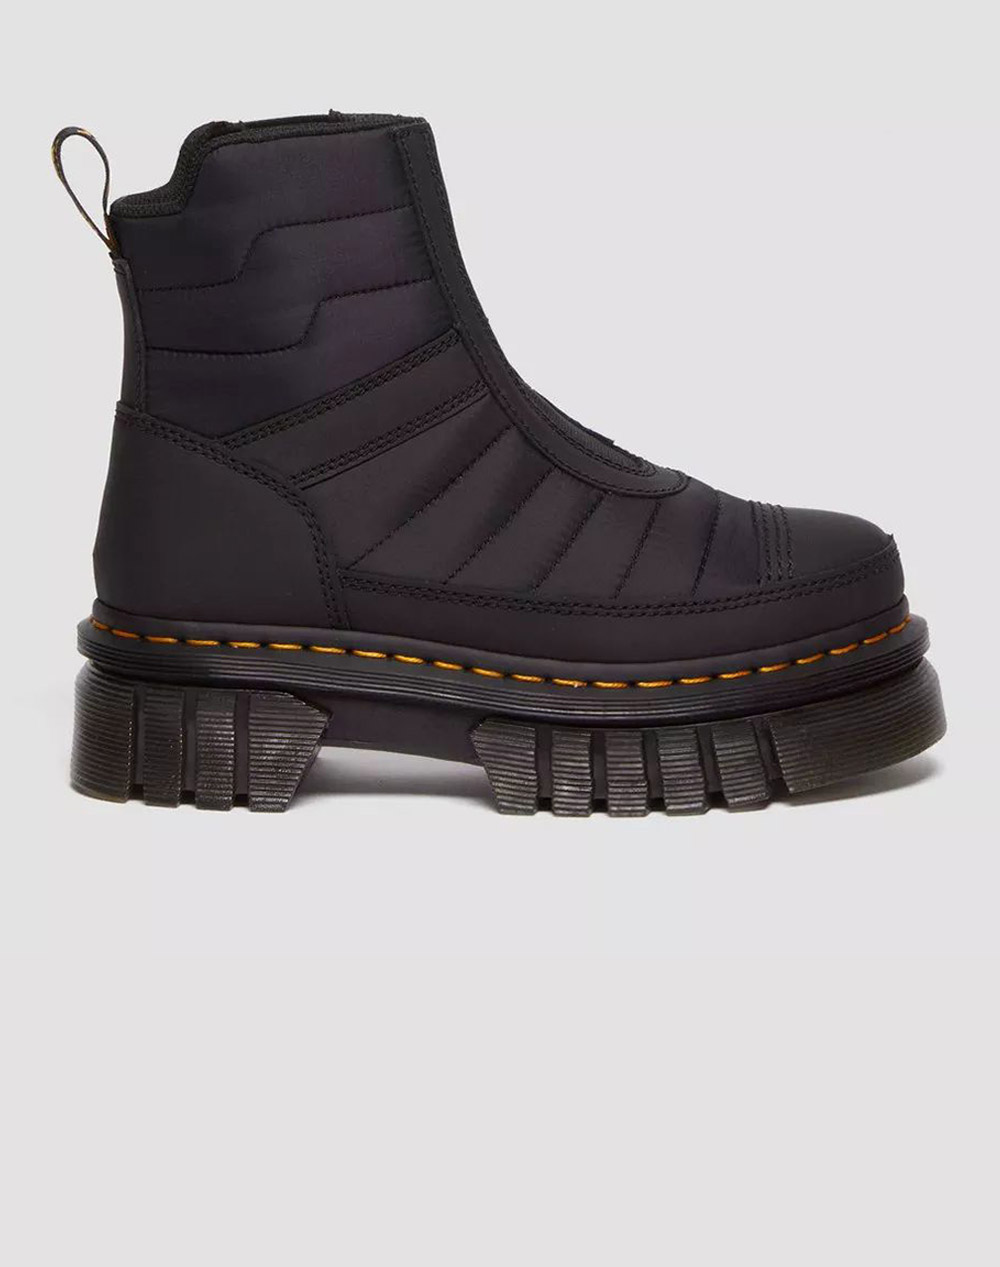 DR.MARTENS 30915001 Audrick Chelsea QLTD Rubberised Leather & Warm Quilted GHETUTE DR MARTENS